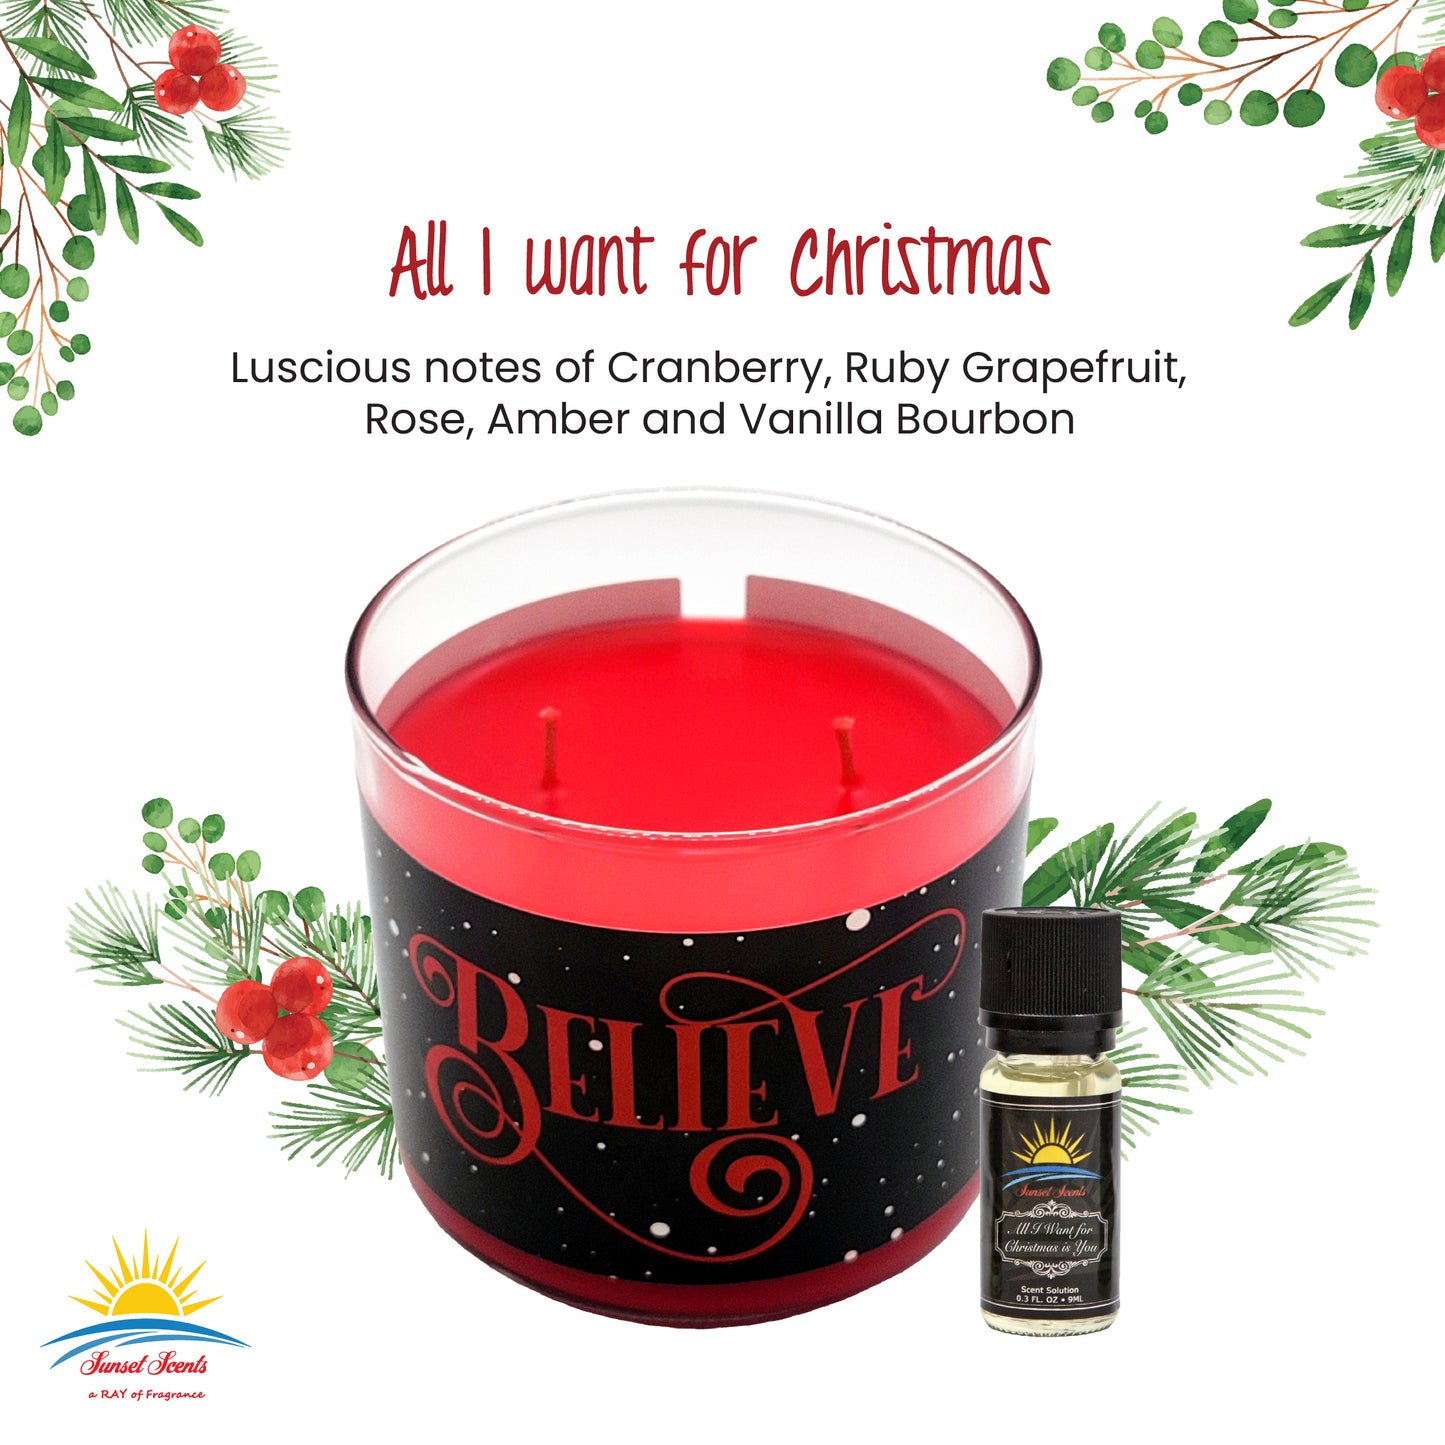 All I Want for Christmas - Musical Memories Scented Candle 14oz